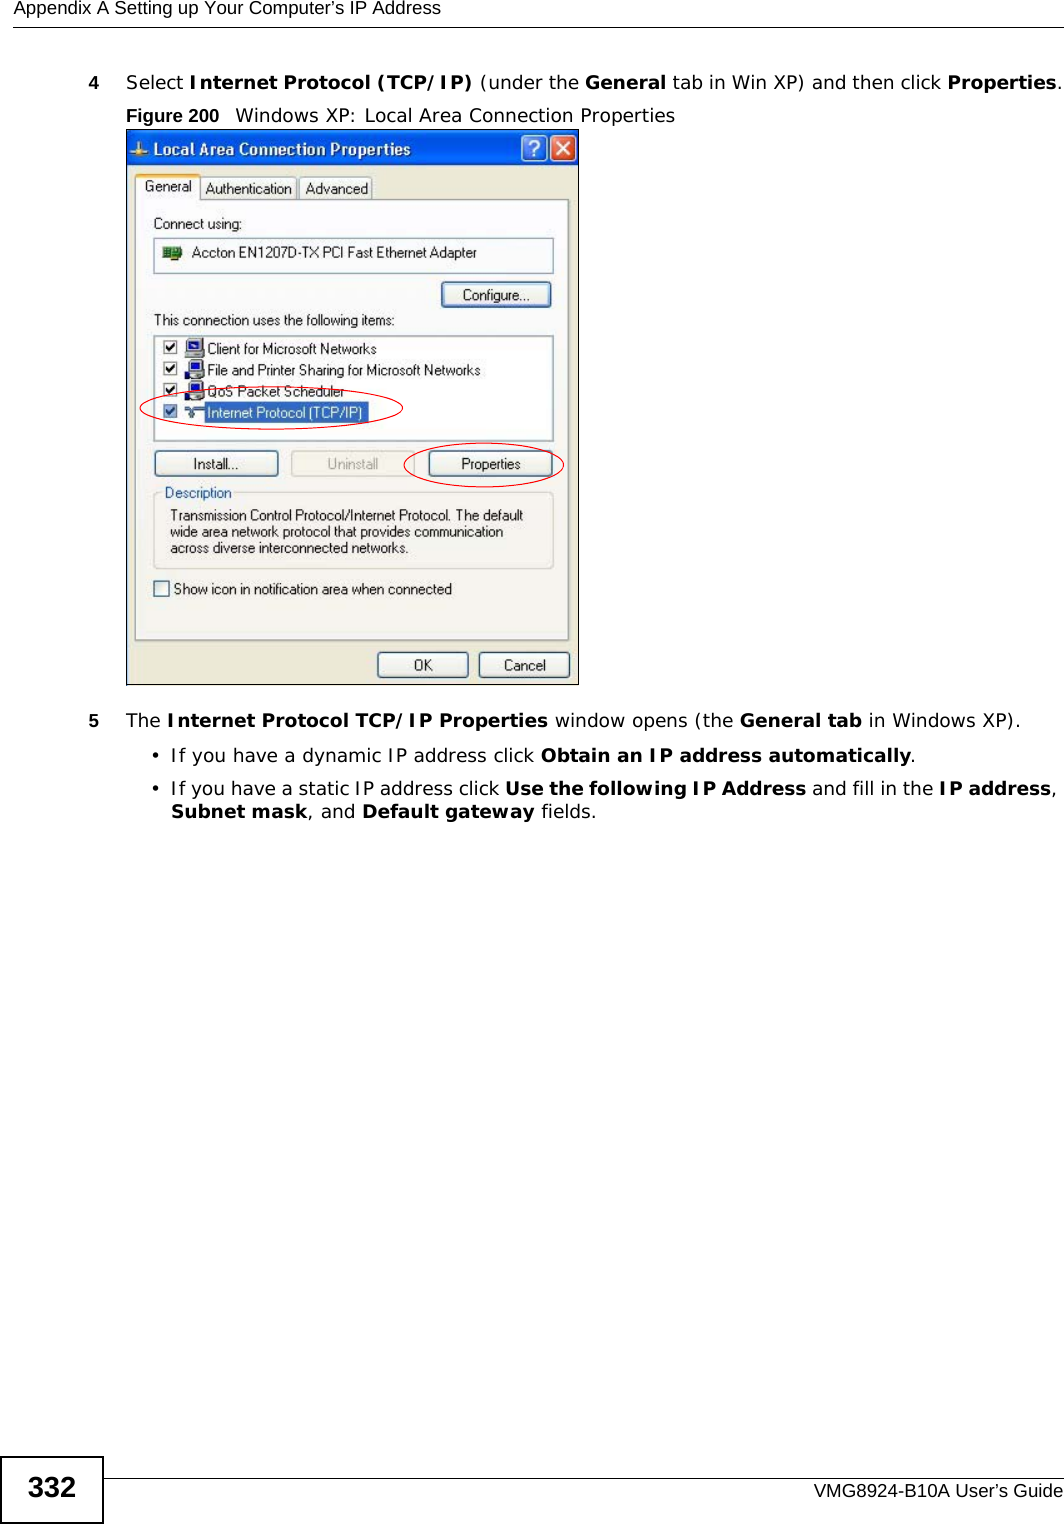 Appendix A Setting up Your Computer’s IP AddressVMG8924-B10A User’s Guide3324Select Internet Protocol (TCP/IP) (under the General tab in Win XP) and then click Properties.Figure 200   Windows XP: Local Area Connection Properties5The Internet Protocol TCP/IP Properties window opens (the General tab in Windows XP).• If you have a dynamic IP address click Obtain an IP address automatically.• If you have a static IP address click Use the following IP Address and fill in the IP address, Subnet mask, and Default gateway fields. 